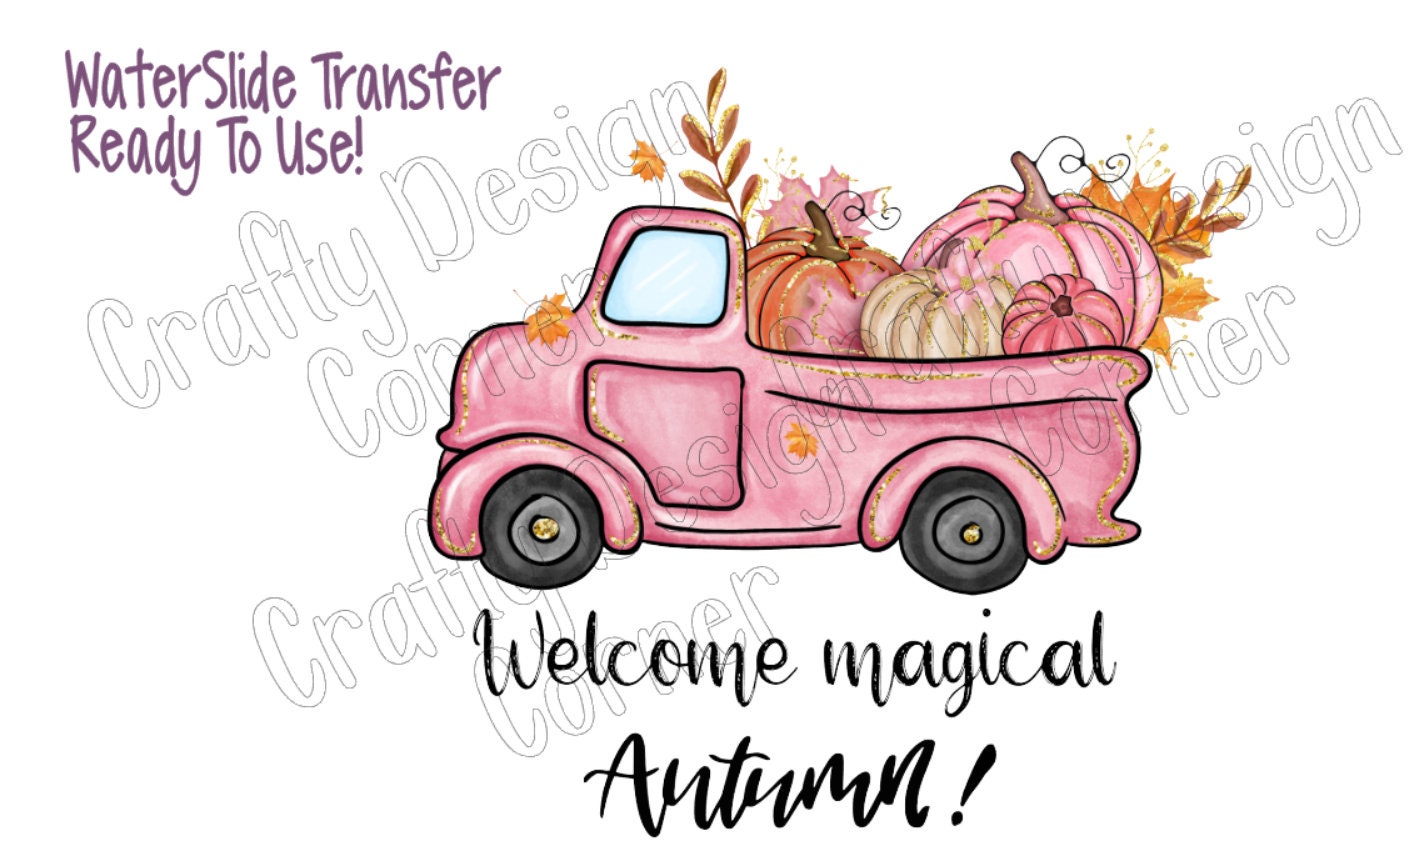 RTP Welcome Magical Autumn Truck Sublimation or clear Waterslide option